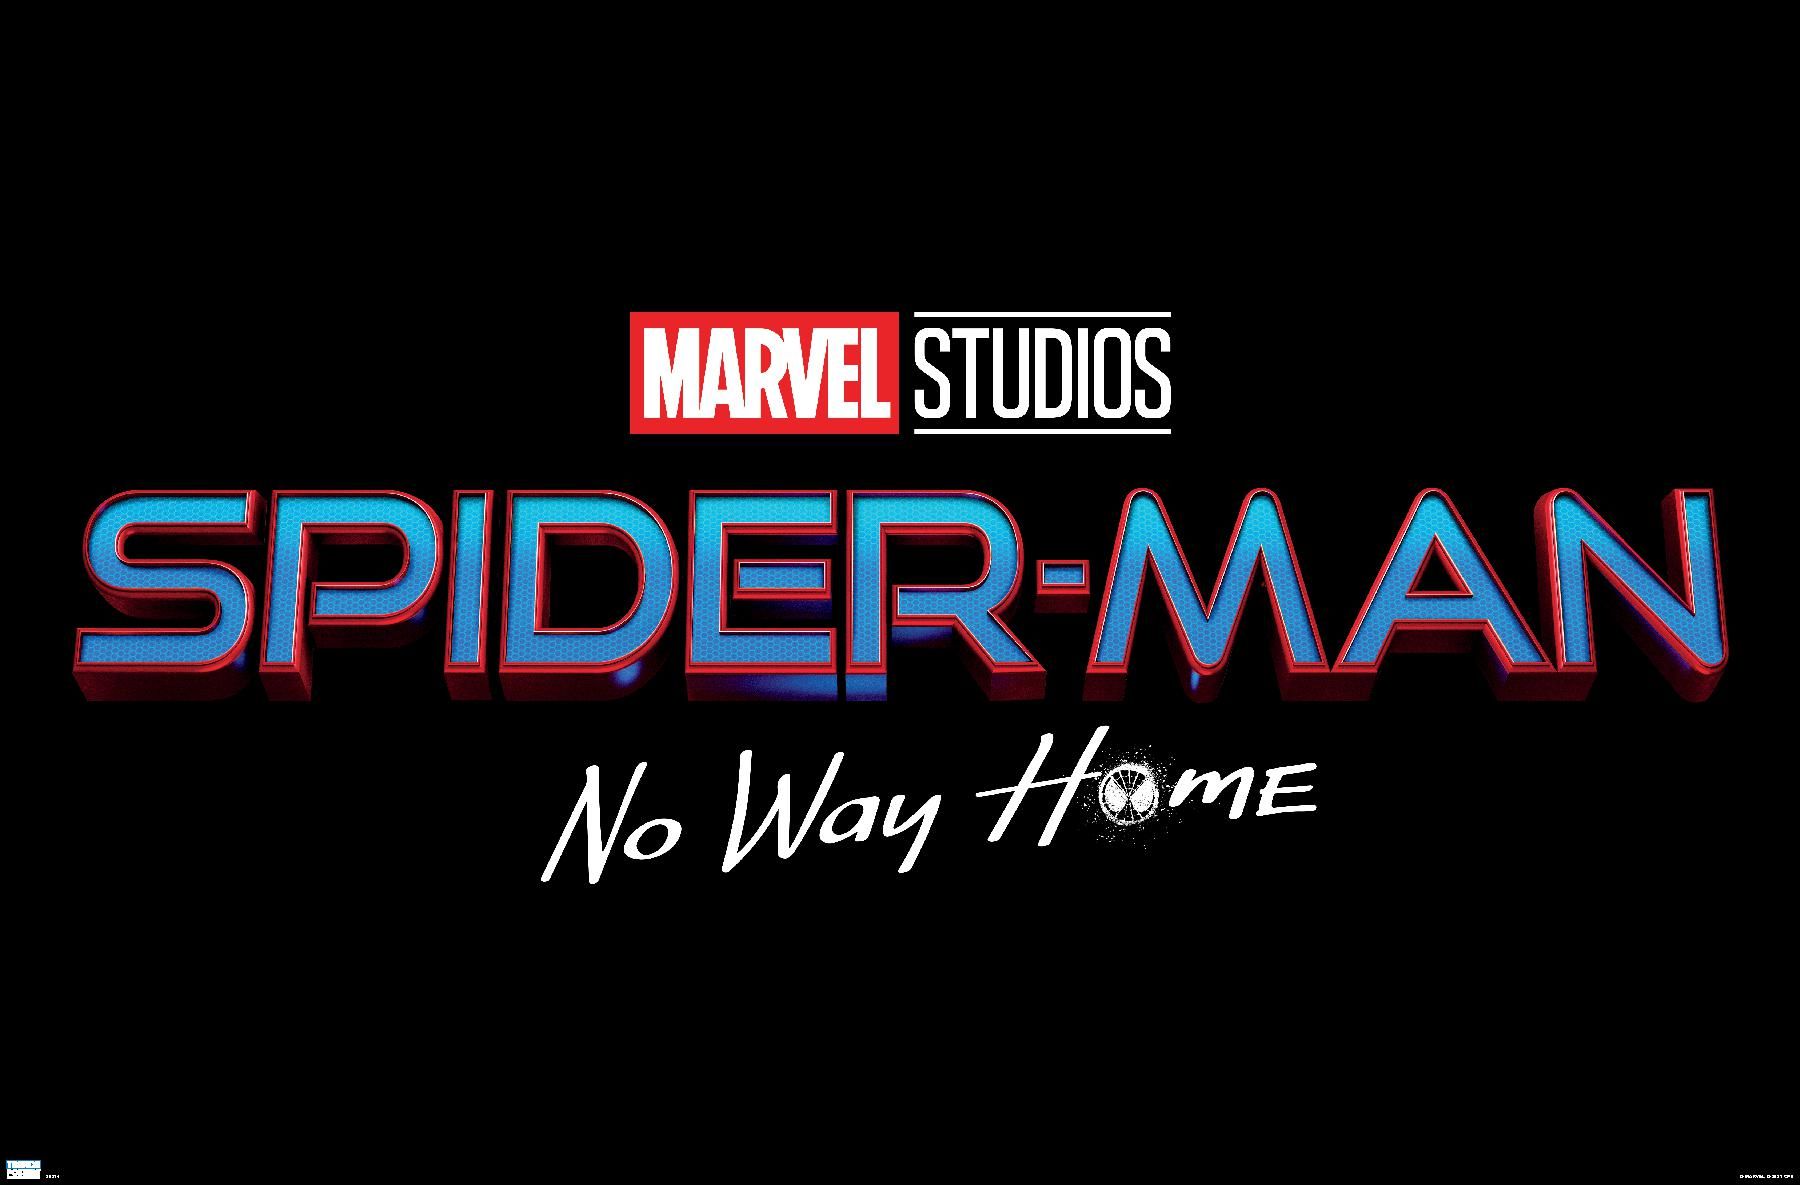 Spider-Man: No Way Home (2021) Review – Fan Service Done Well